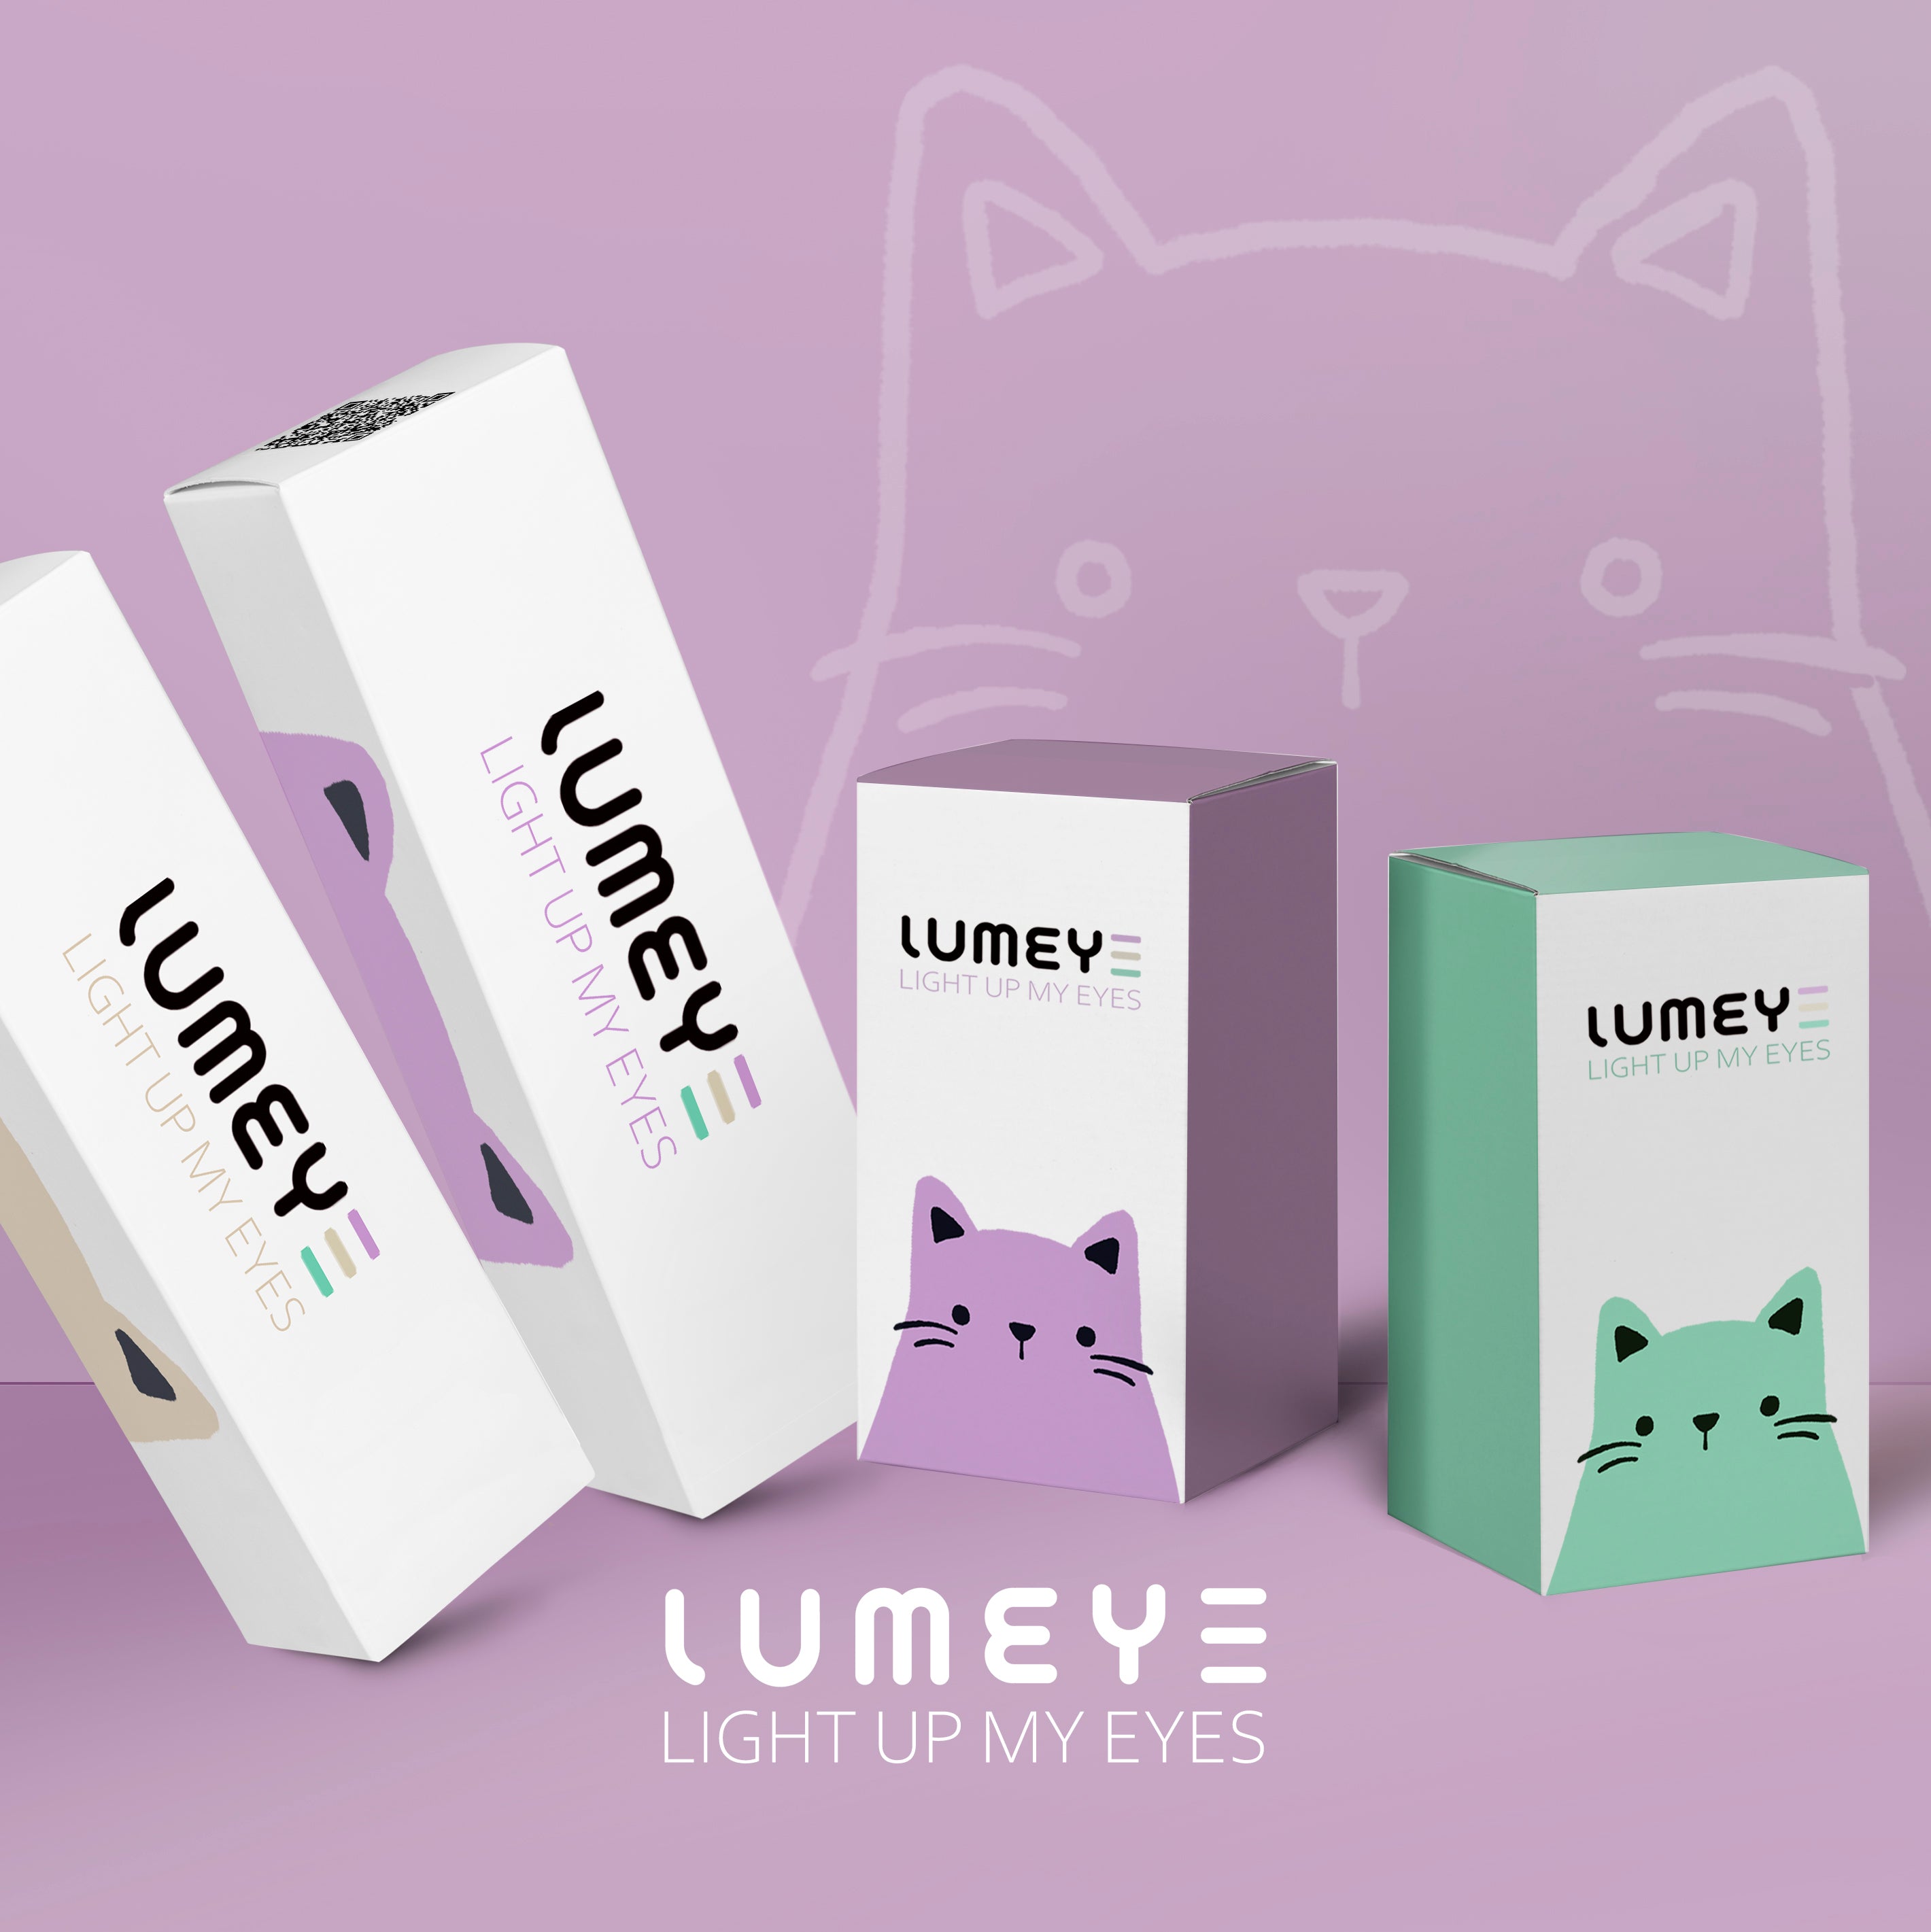 Best COLORED CONTACTS - LUMEYE Circle Brown Colored Contact Lenses - LUMEYE